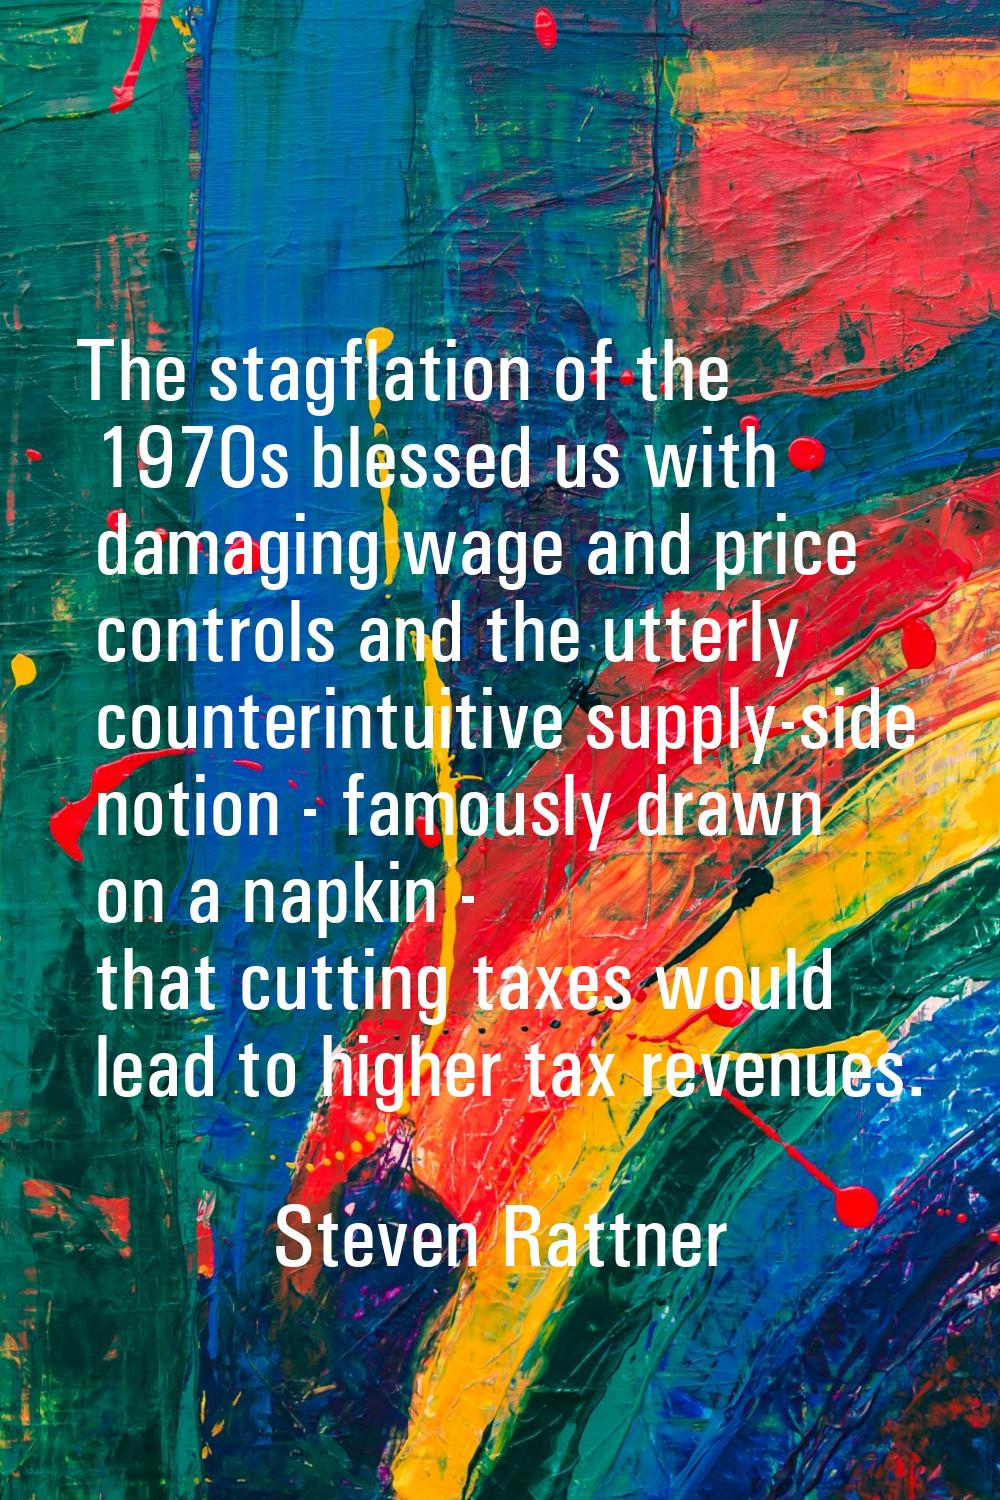 The stagflation of the 1970s blessed us with damaging wage and price controls and the utterly count